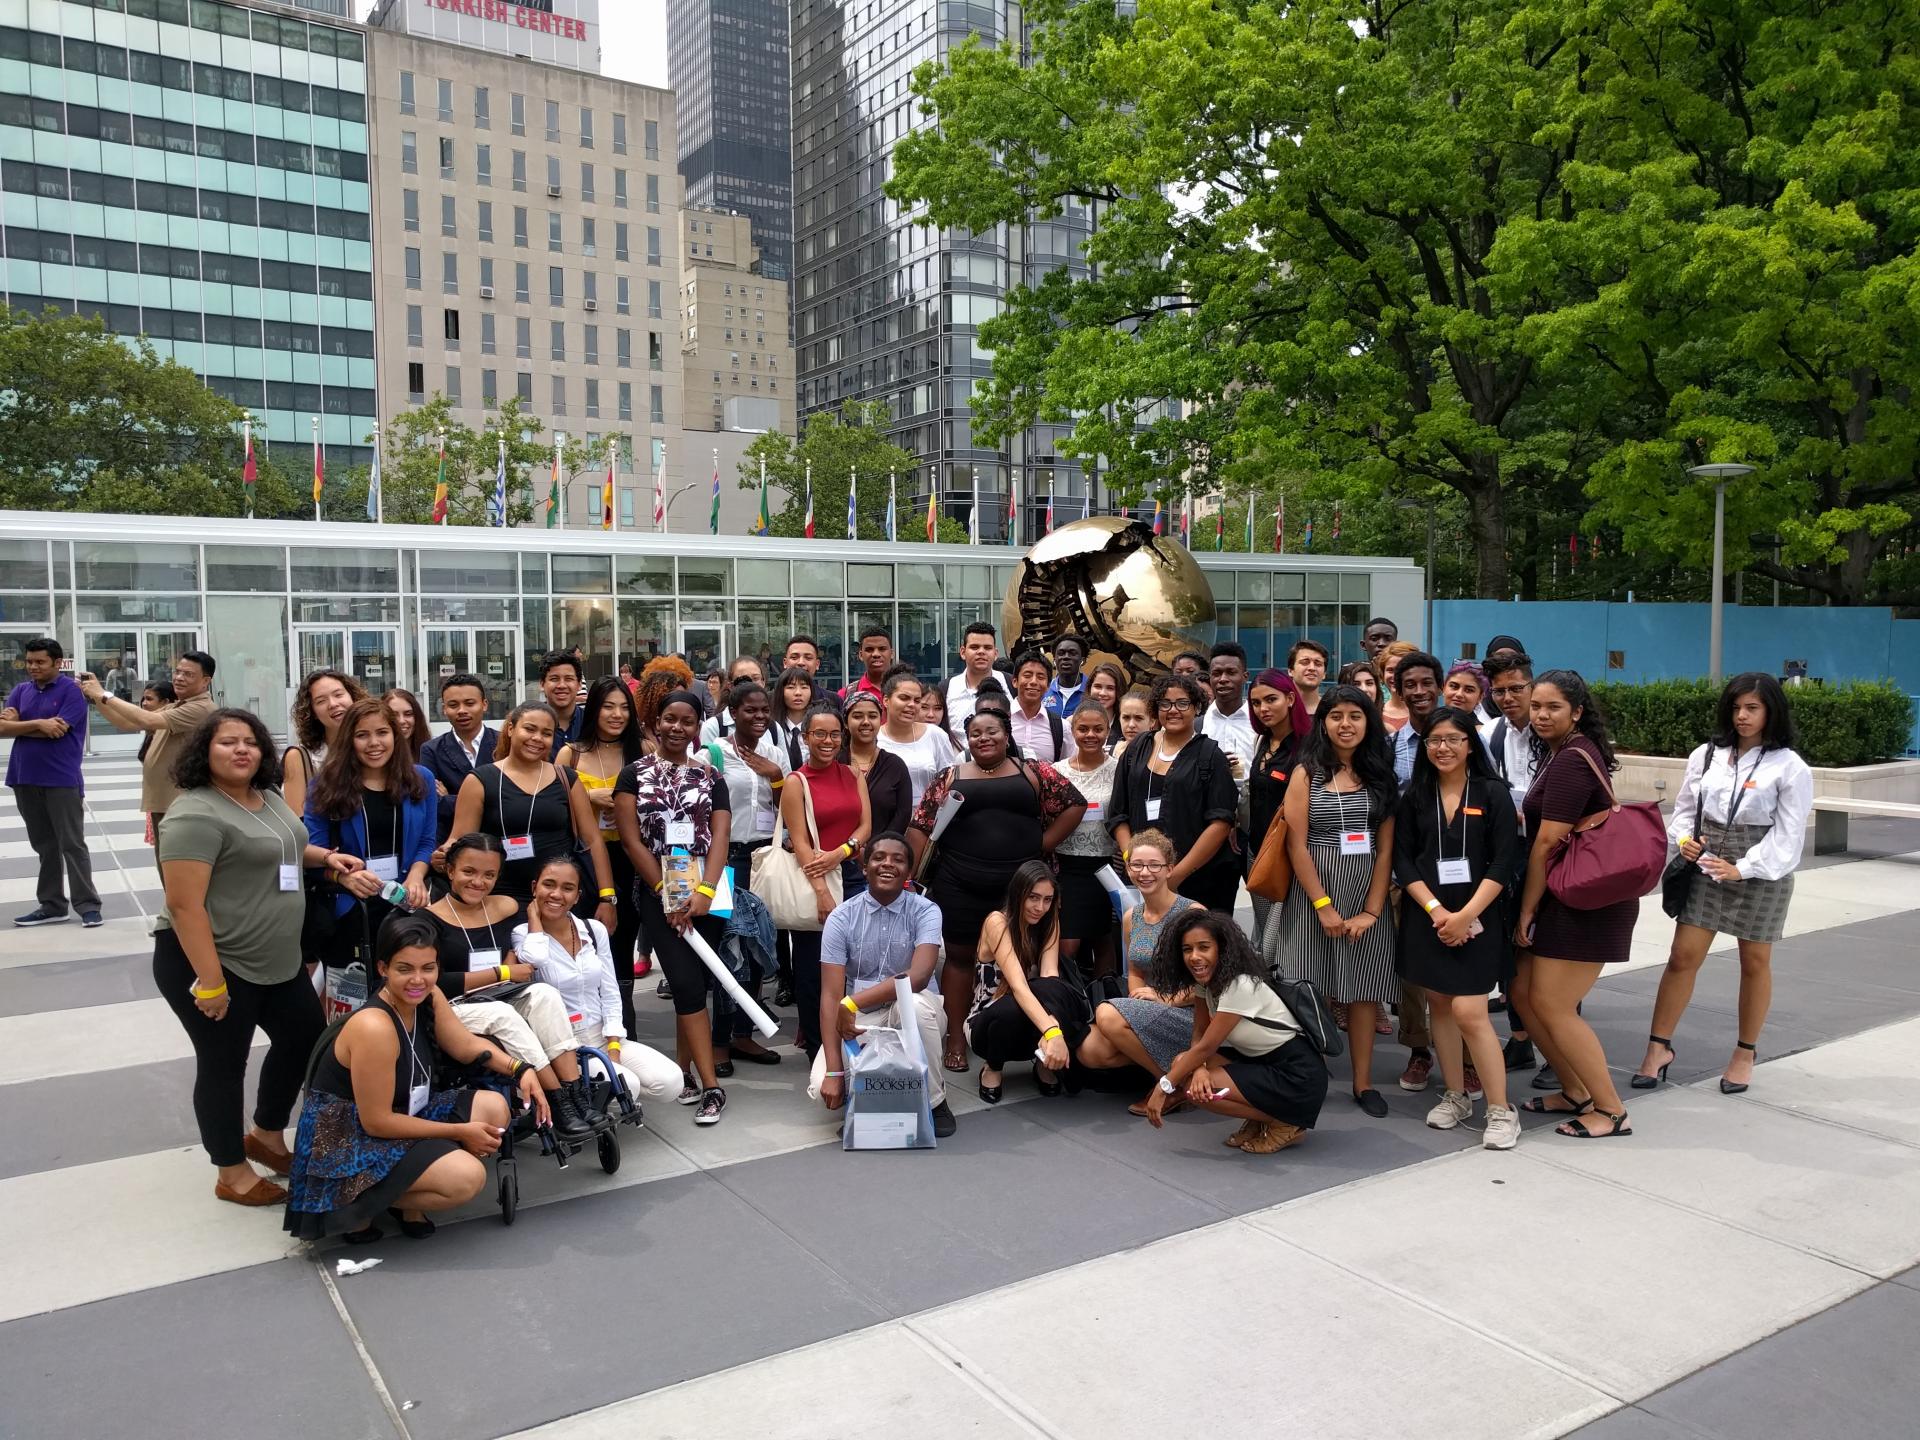 Students at the United Nations